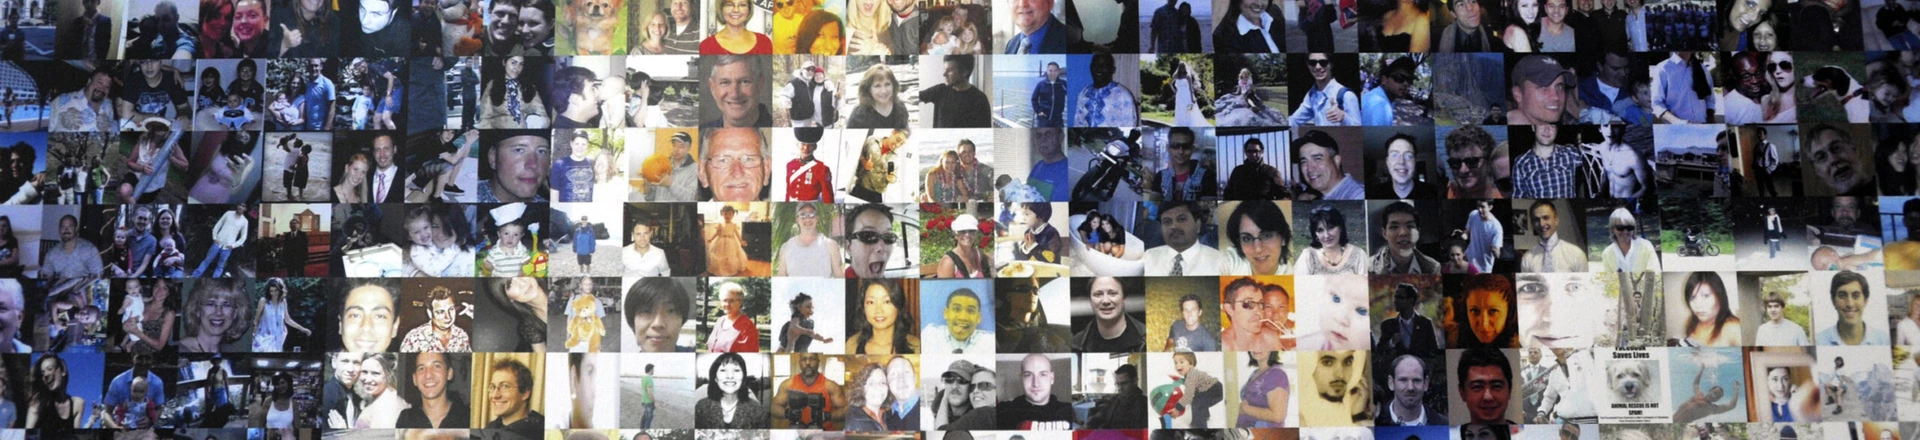 FOREST CITY, NC - APRIL 19:  A collage of profile pictures makes up a wall in the break room at the new Facebook Data Center on April 19, 2012 in Forest City, North Carolina.  The company began construction on the facility in November 2010 and went live today, serving the 845 million Facebook users worldwide.  (Photo by Rainier Ehrhardt/Getty Images)